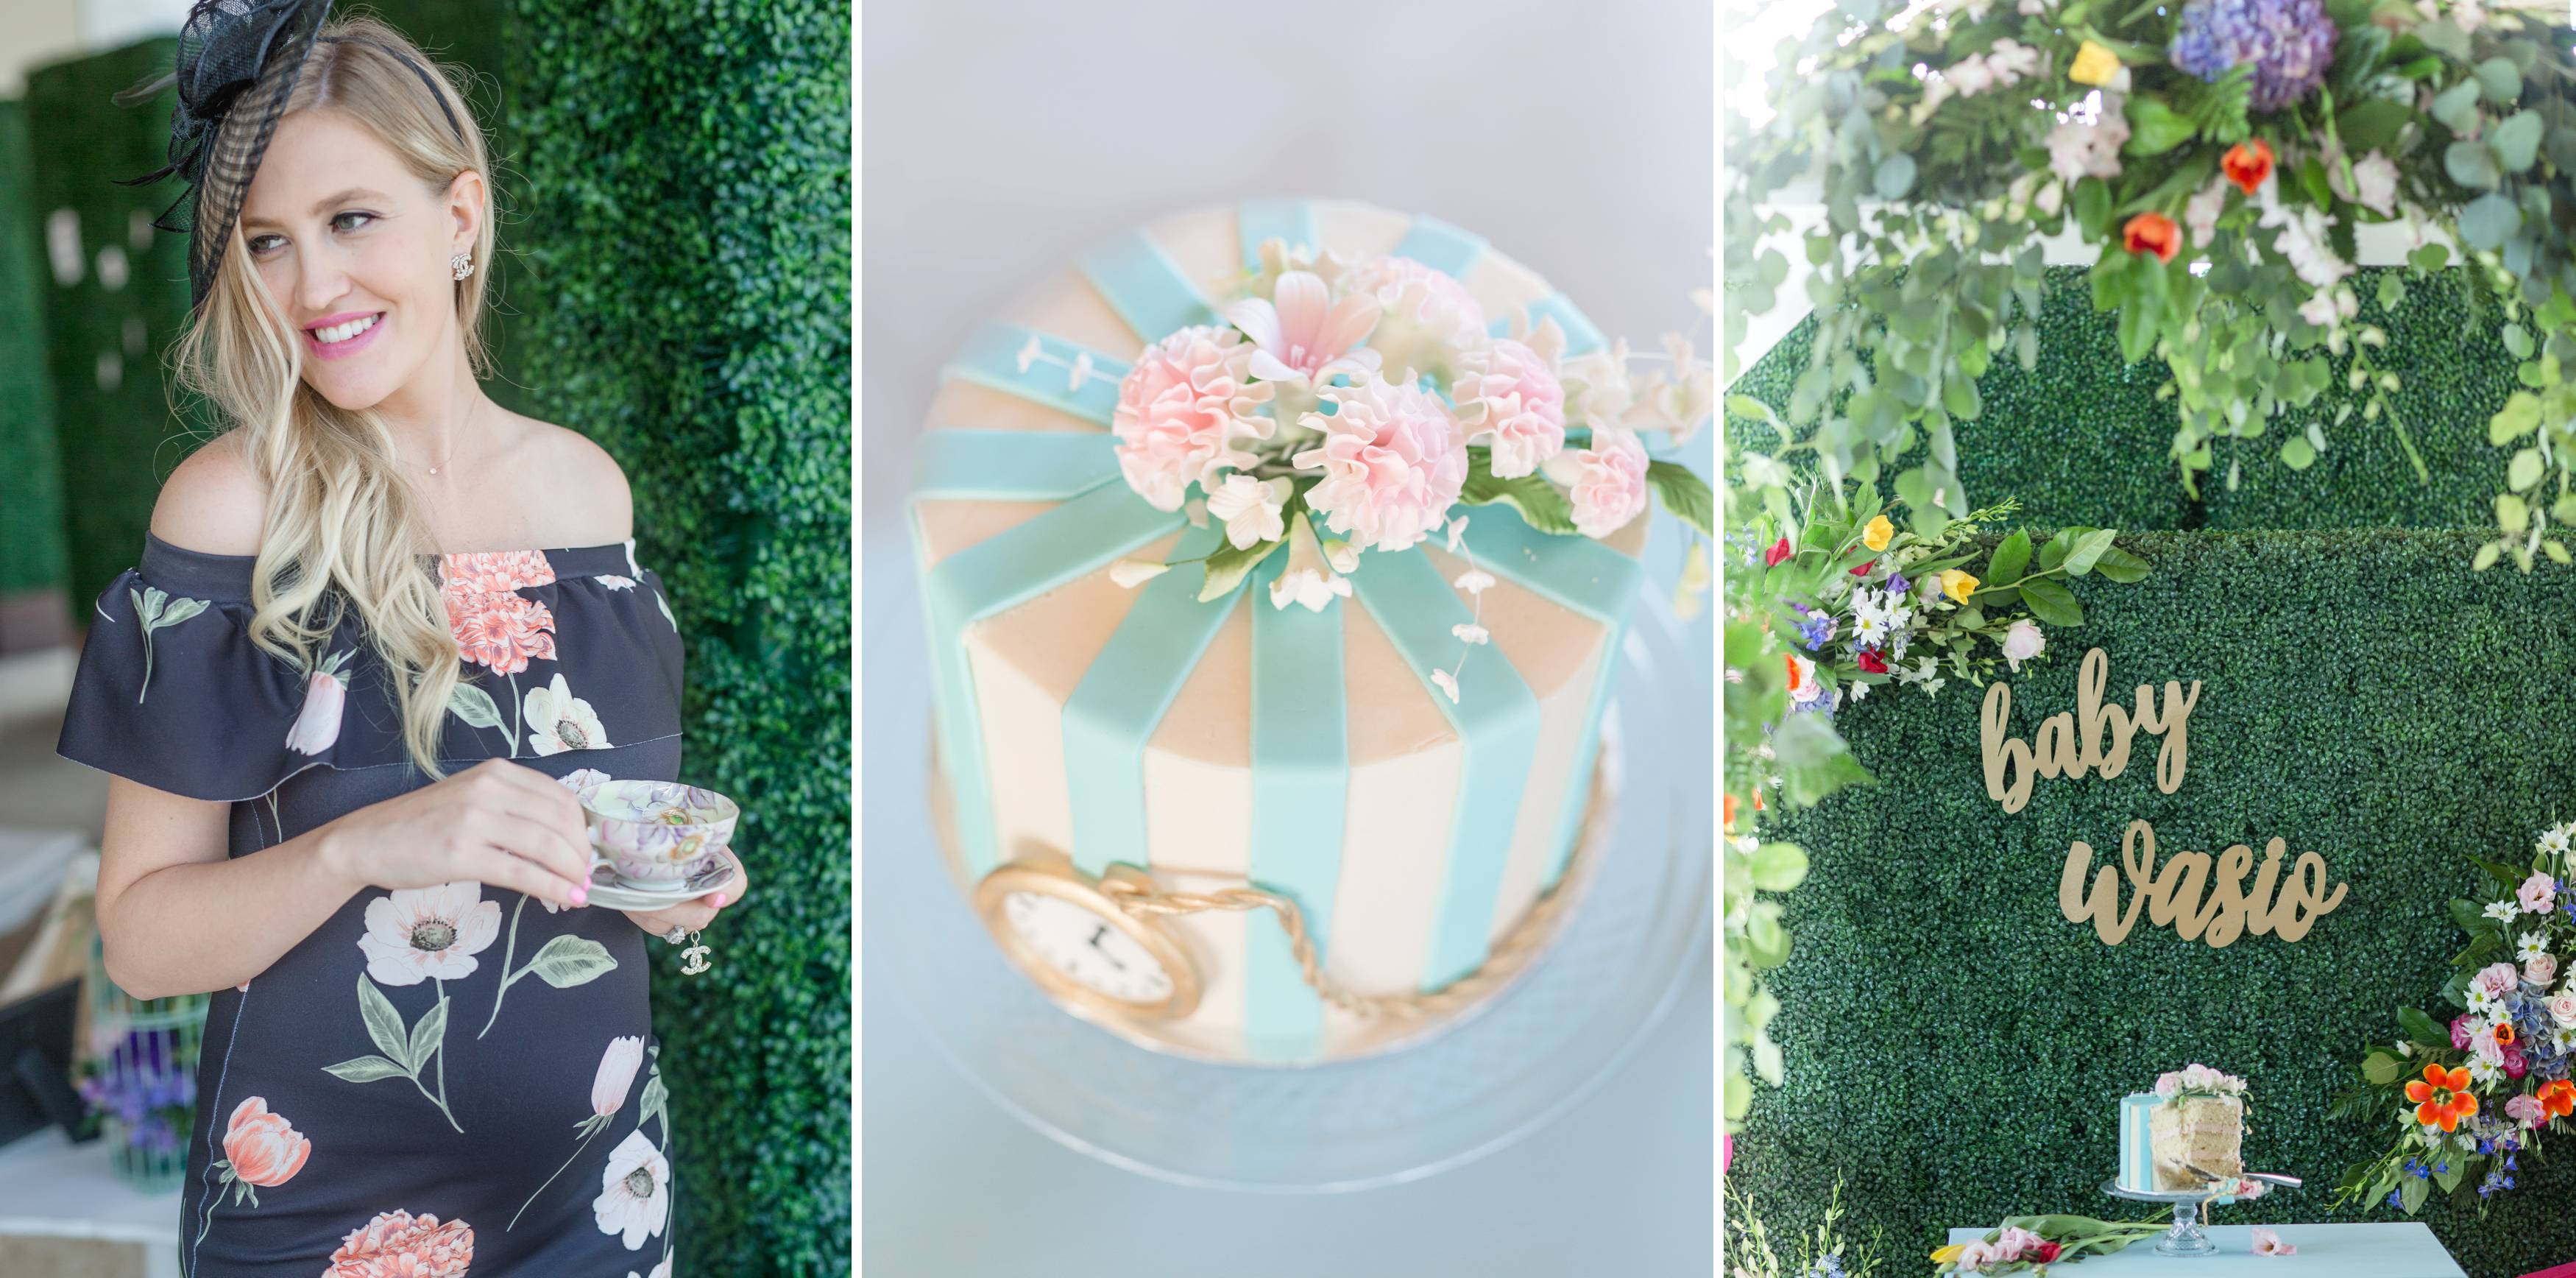 details alice in wonderland baby shower the centre escondido Temecula California wedding engagement maternity photography Carrie McGuire photographer California